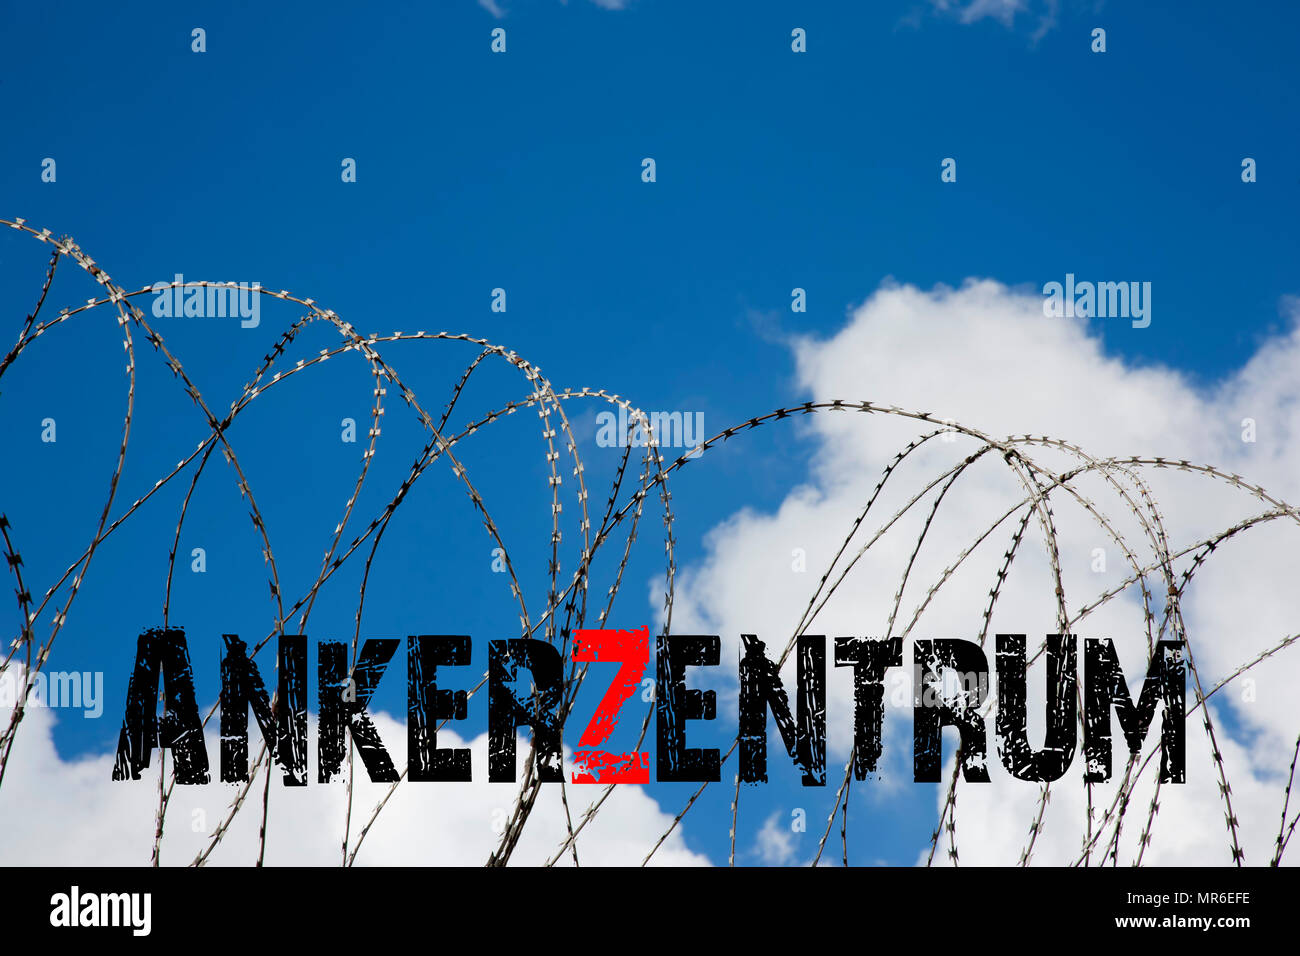 Digital composing, barbed wire with the lettering Ankerzentrum in front of cloudy blue sky Stock Photo